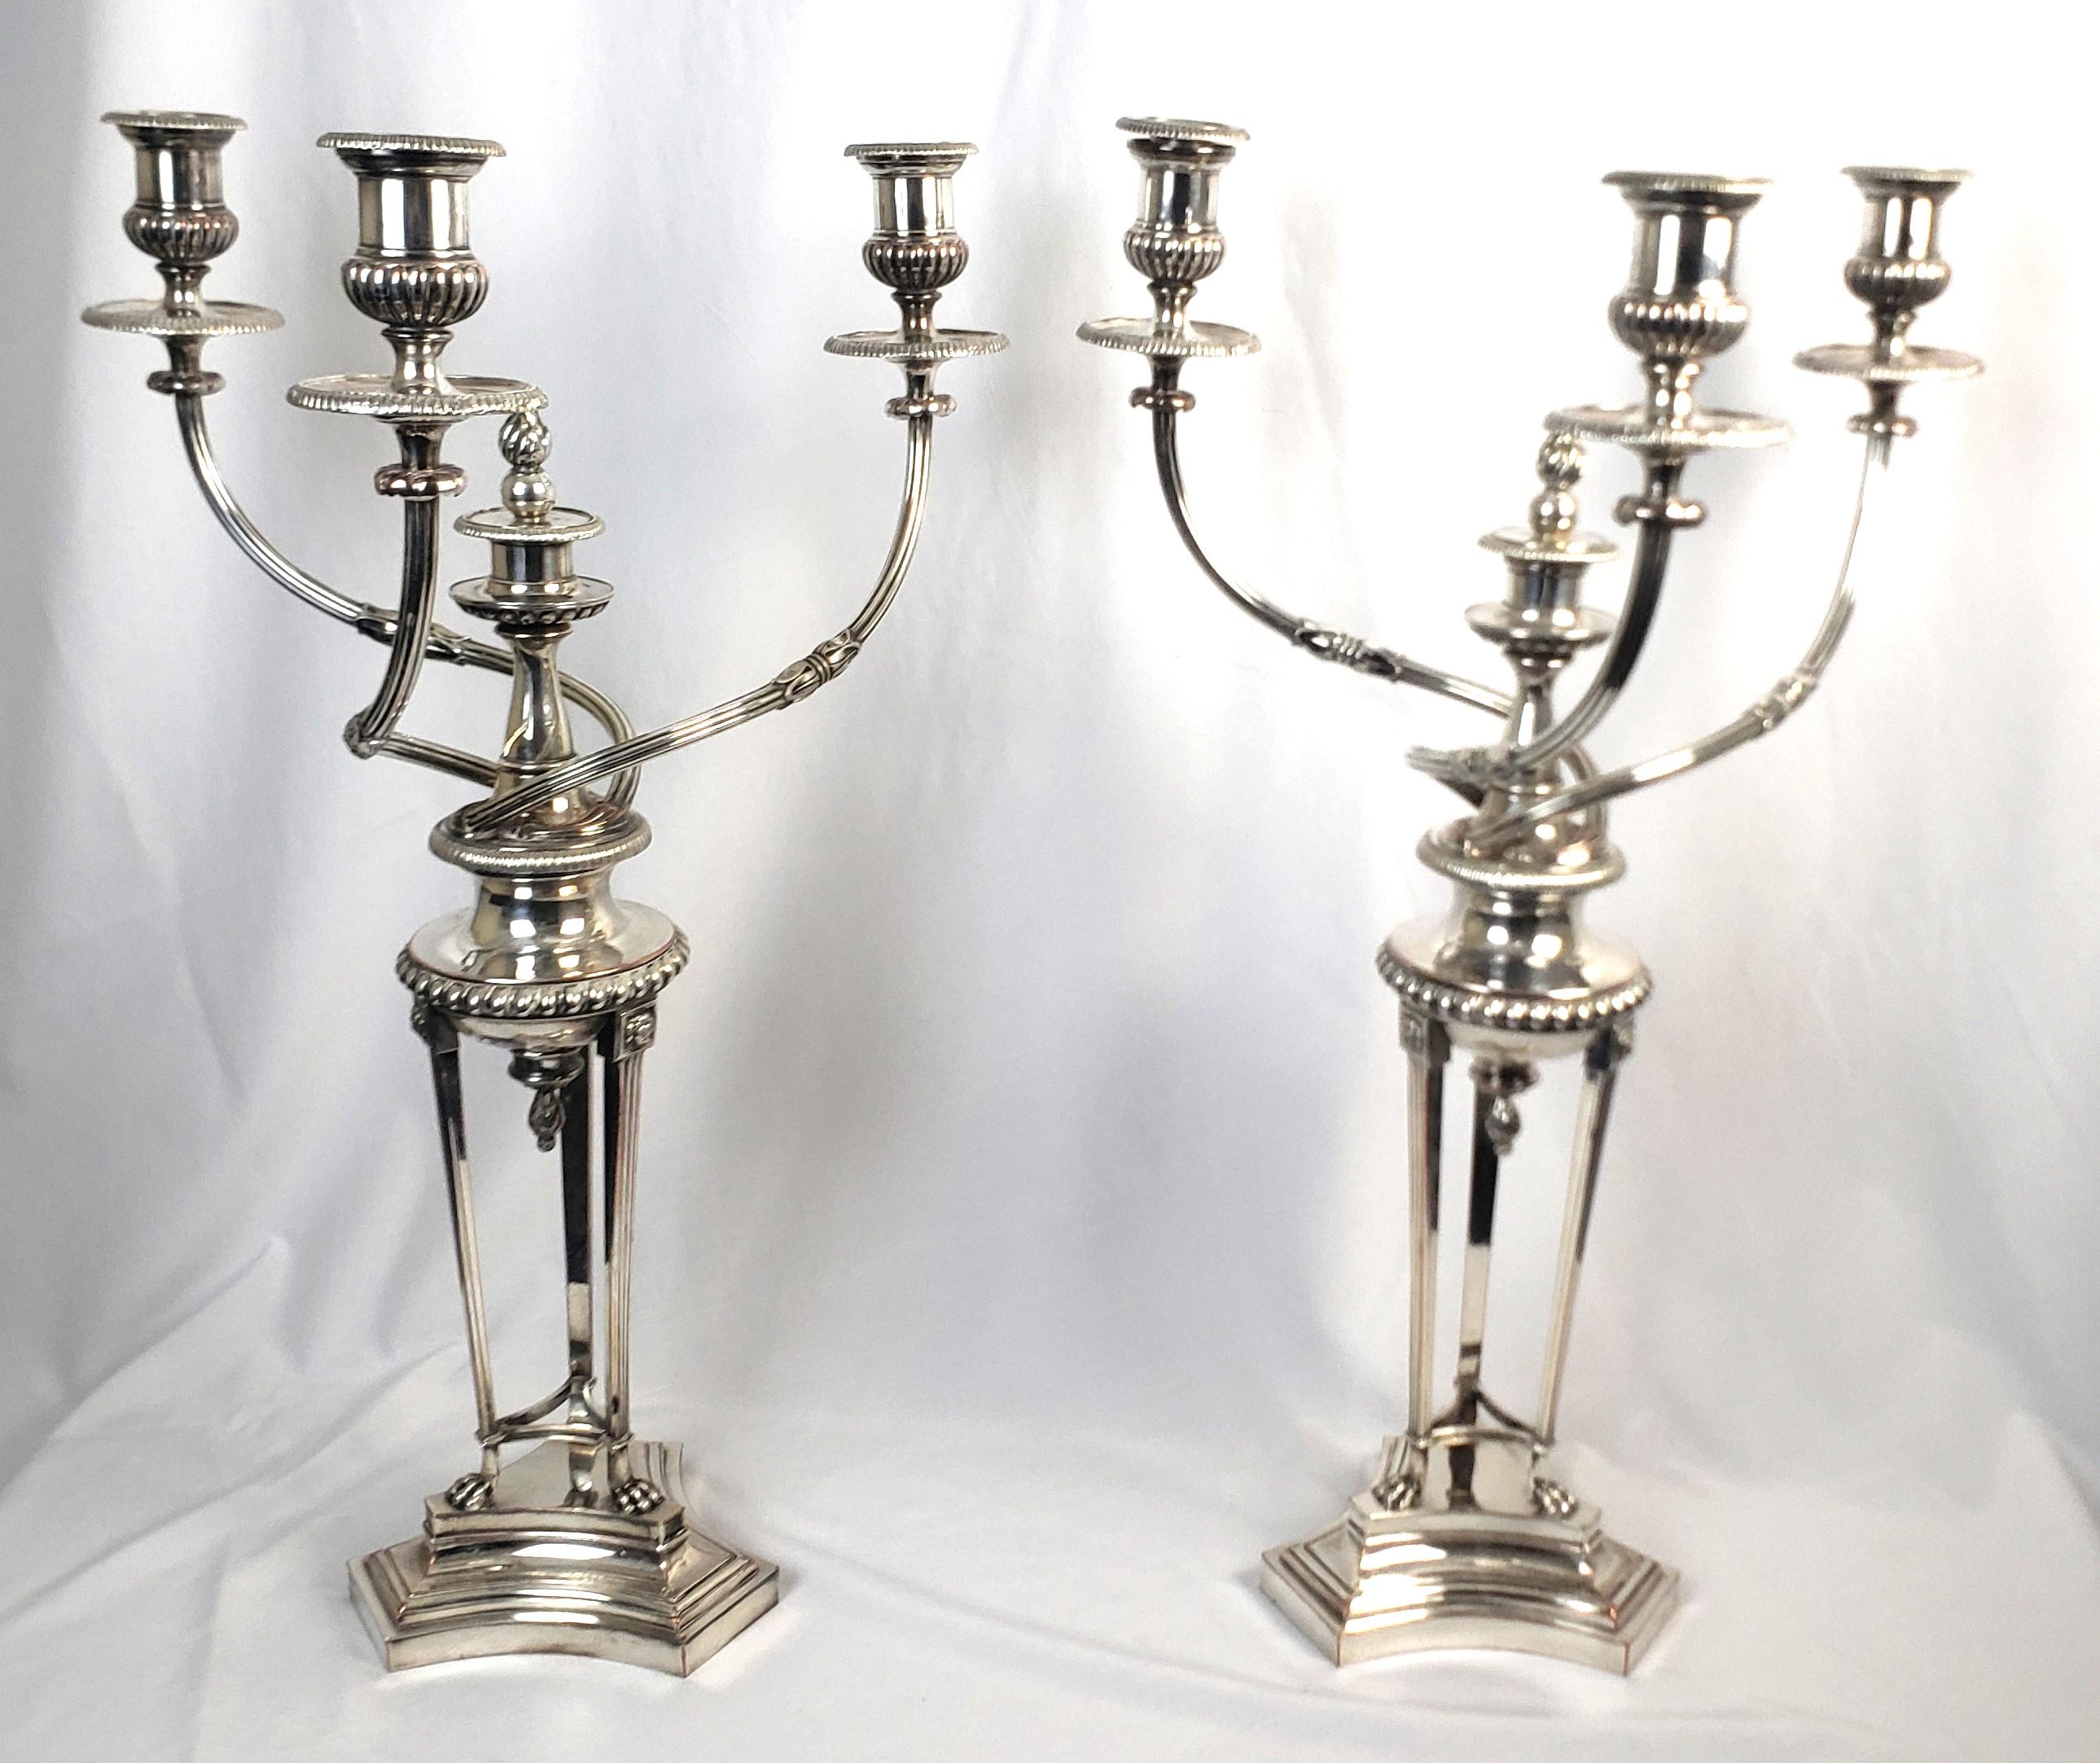 19th Century Pair of Huge Antique Matthew Boulton Regency Three Arm Silver Plated Candelabras For Sale